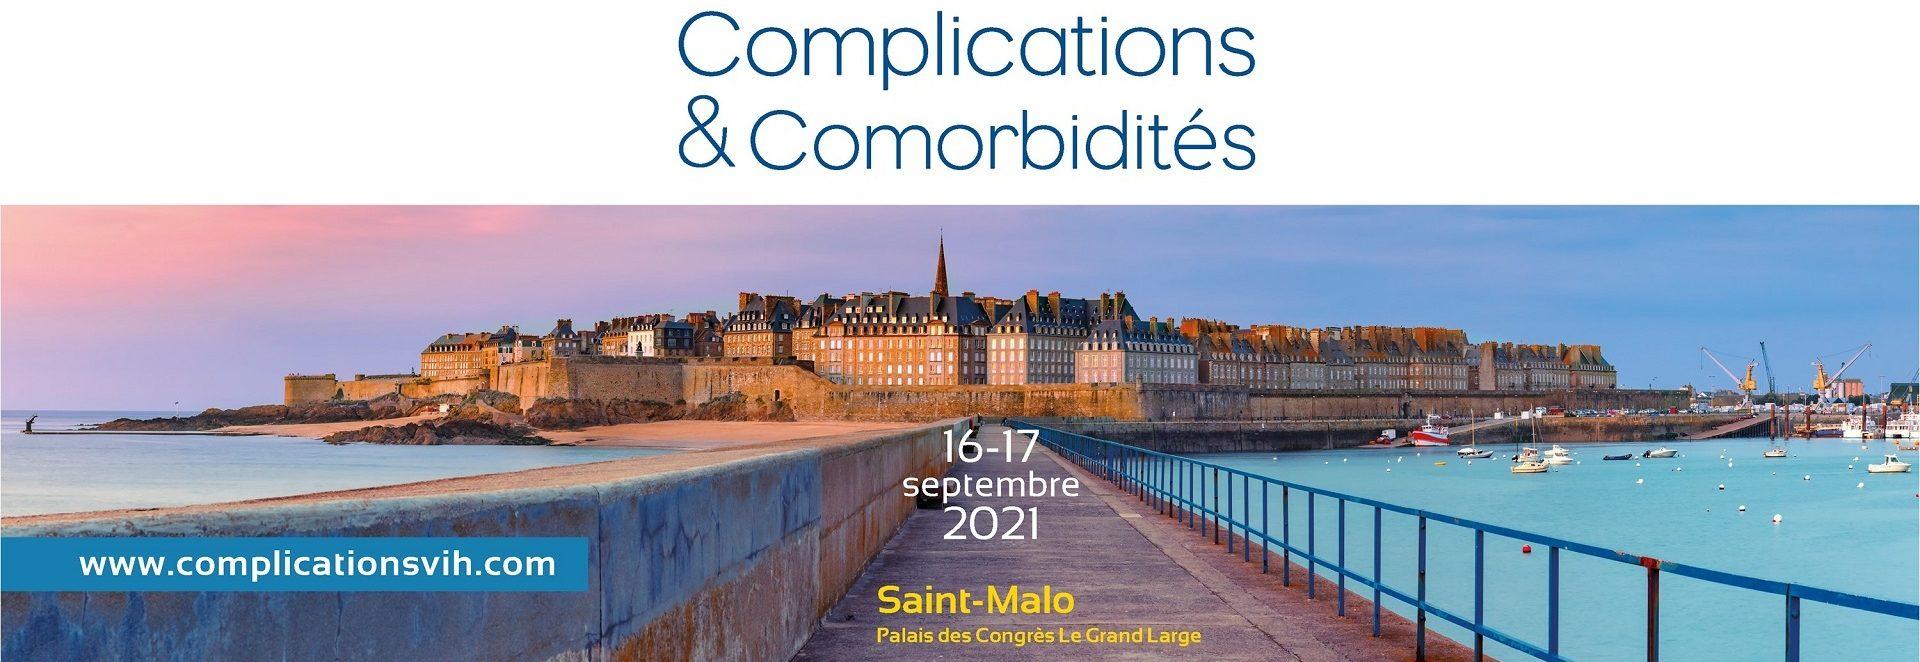 VIsual Slide 9th Edition of the Biannual HIV, Complications and Comorbidities Conference